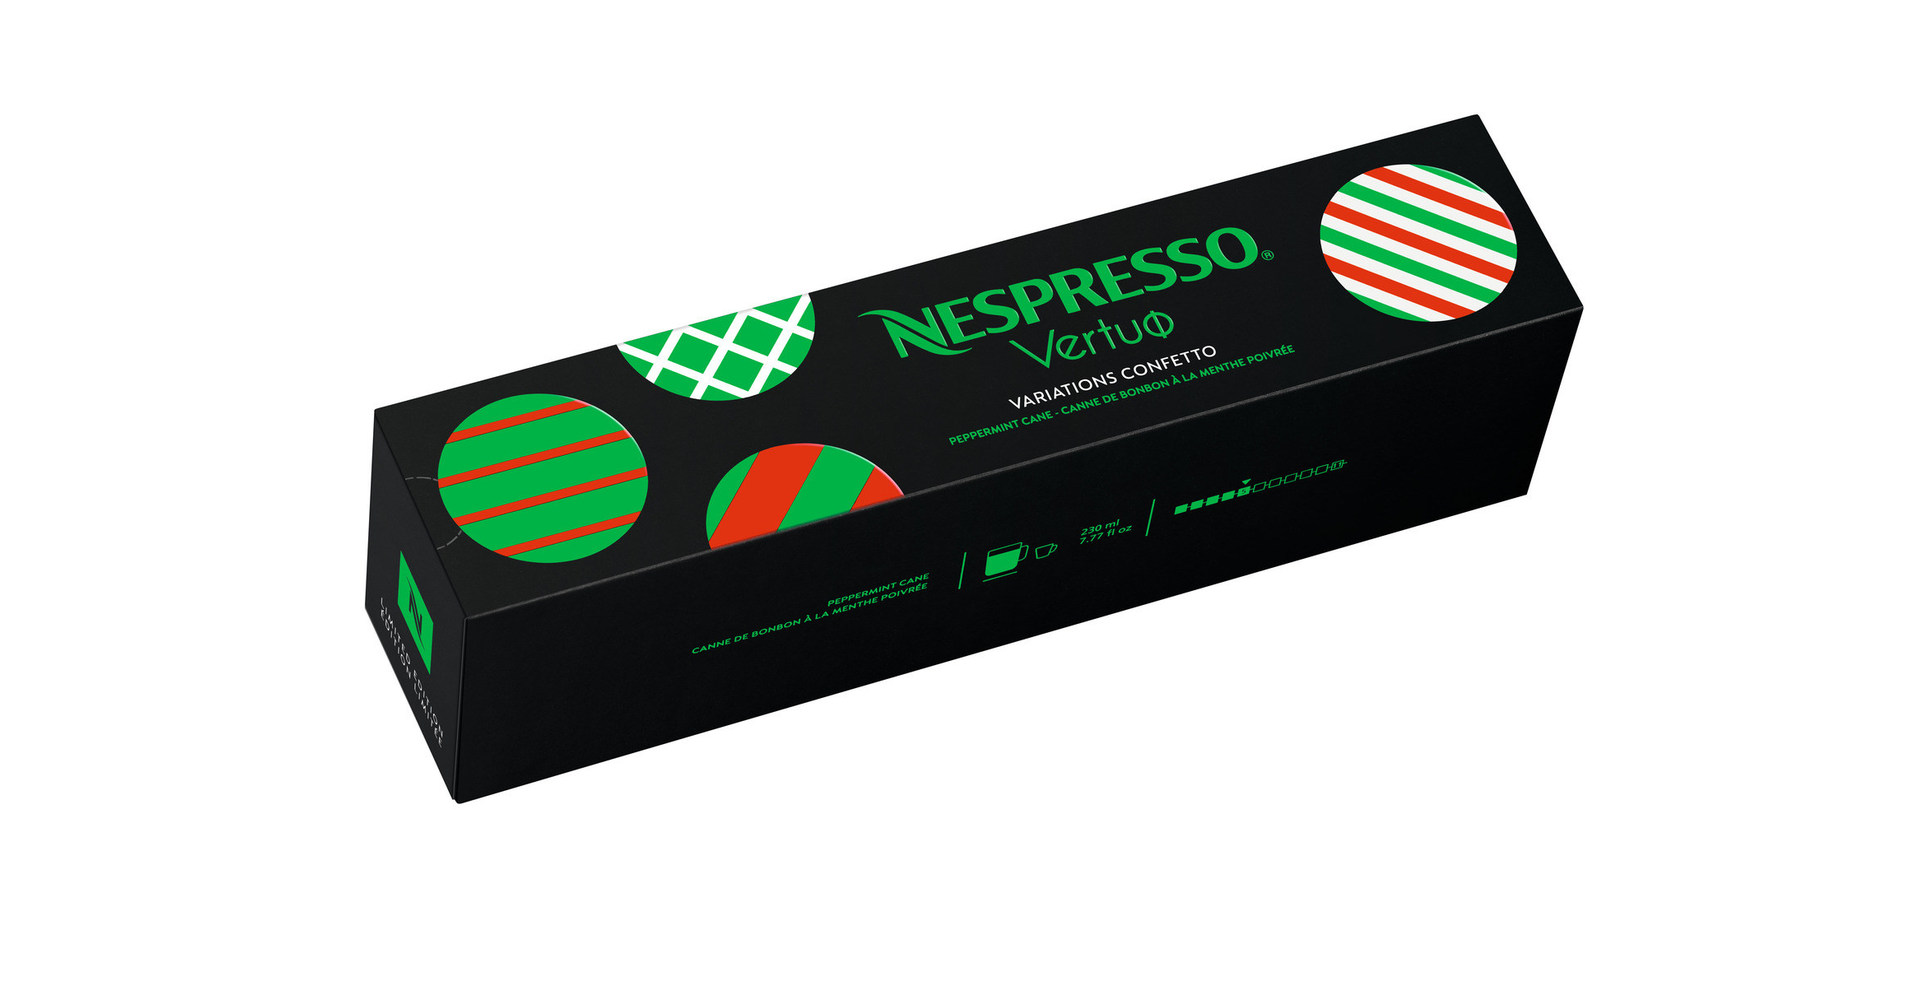 Nespresso Reveals Colorful, Candy-Inspired Limited Edition For The Season